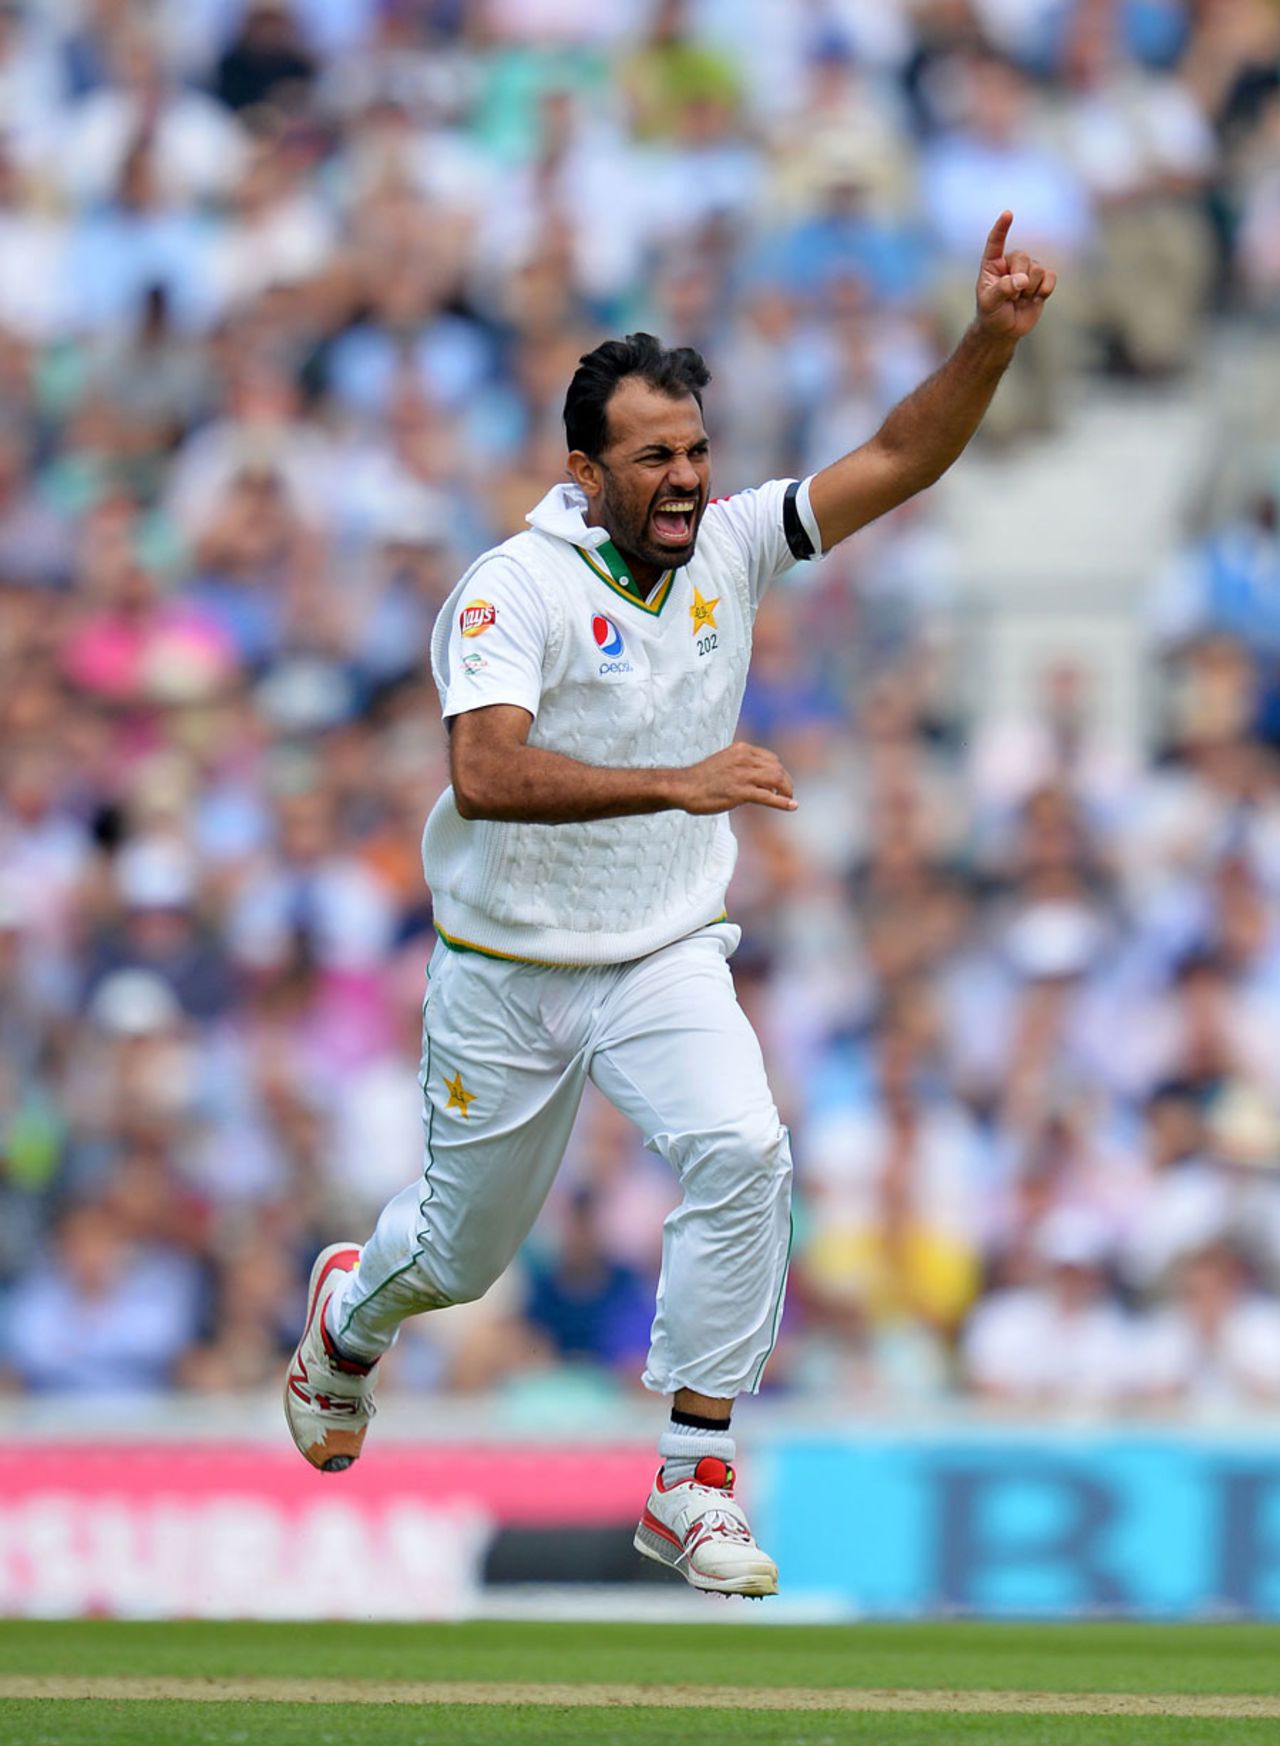 Wahab Riaz removed Joe Root and James Vince in four balls, England v Pakistan, 4th Test, The Oval, 1st day, August 11, 2016